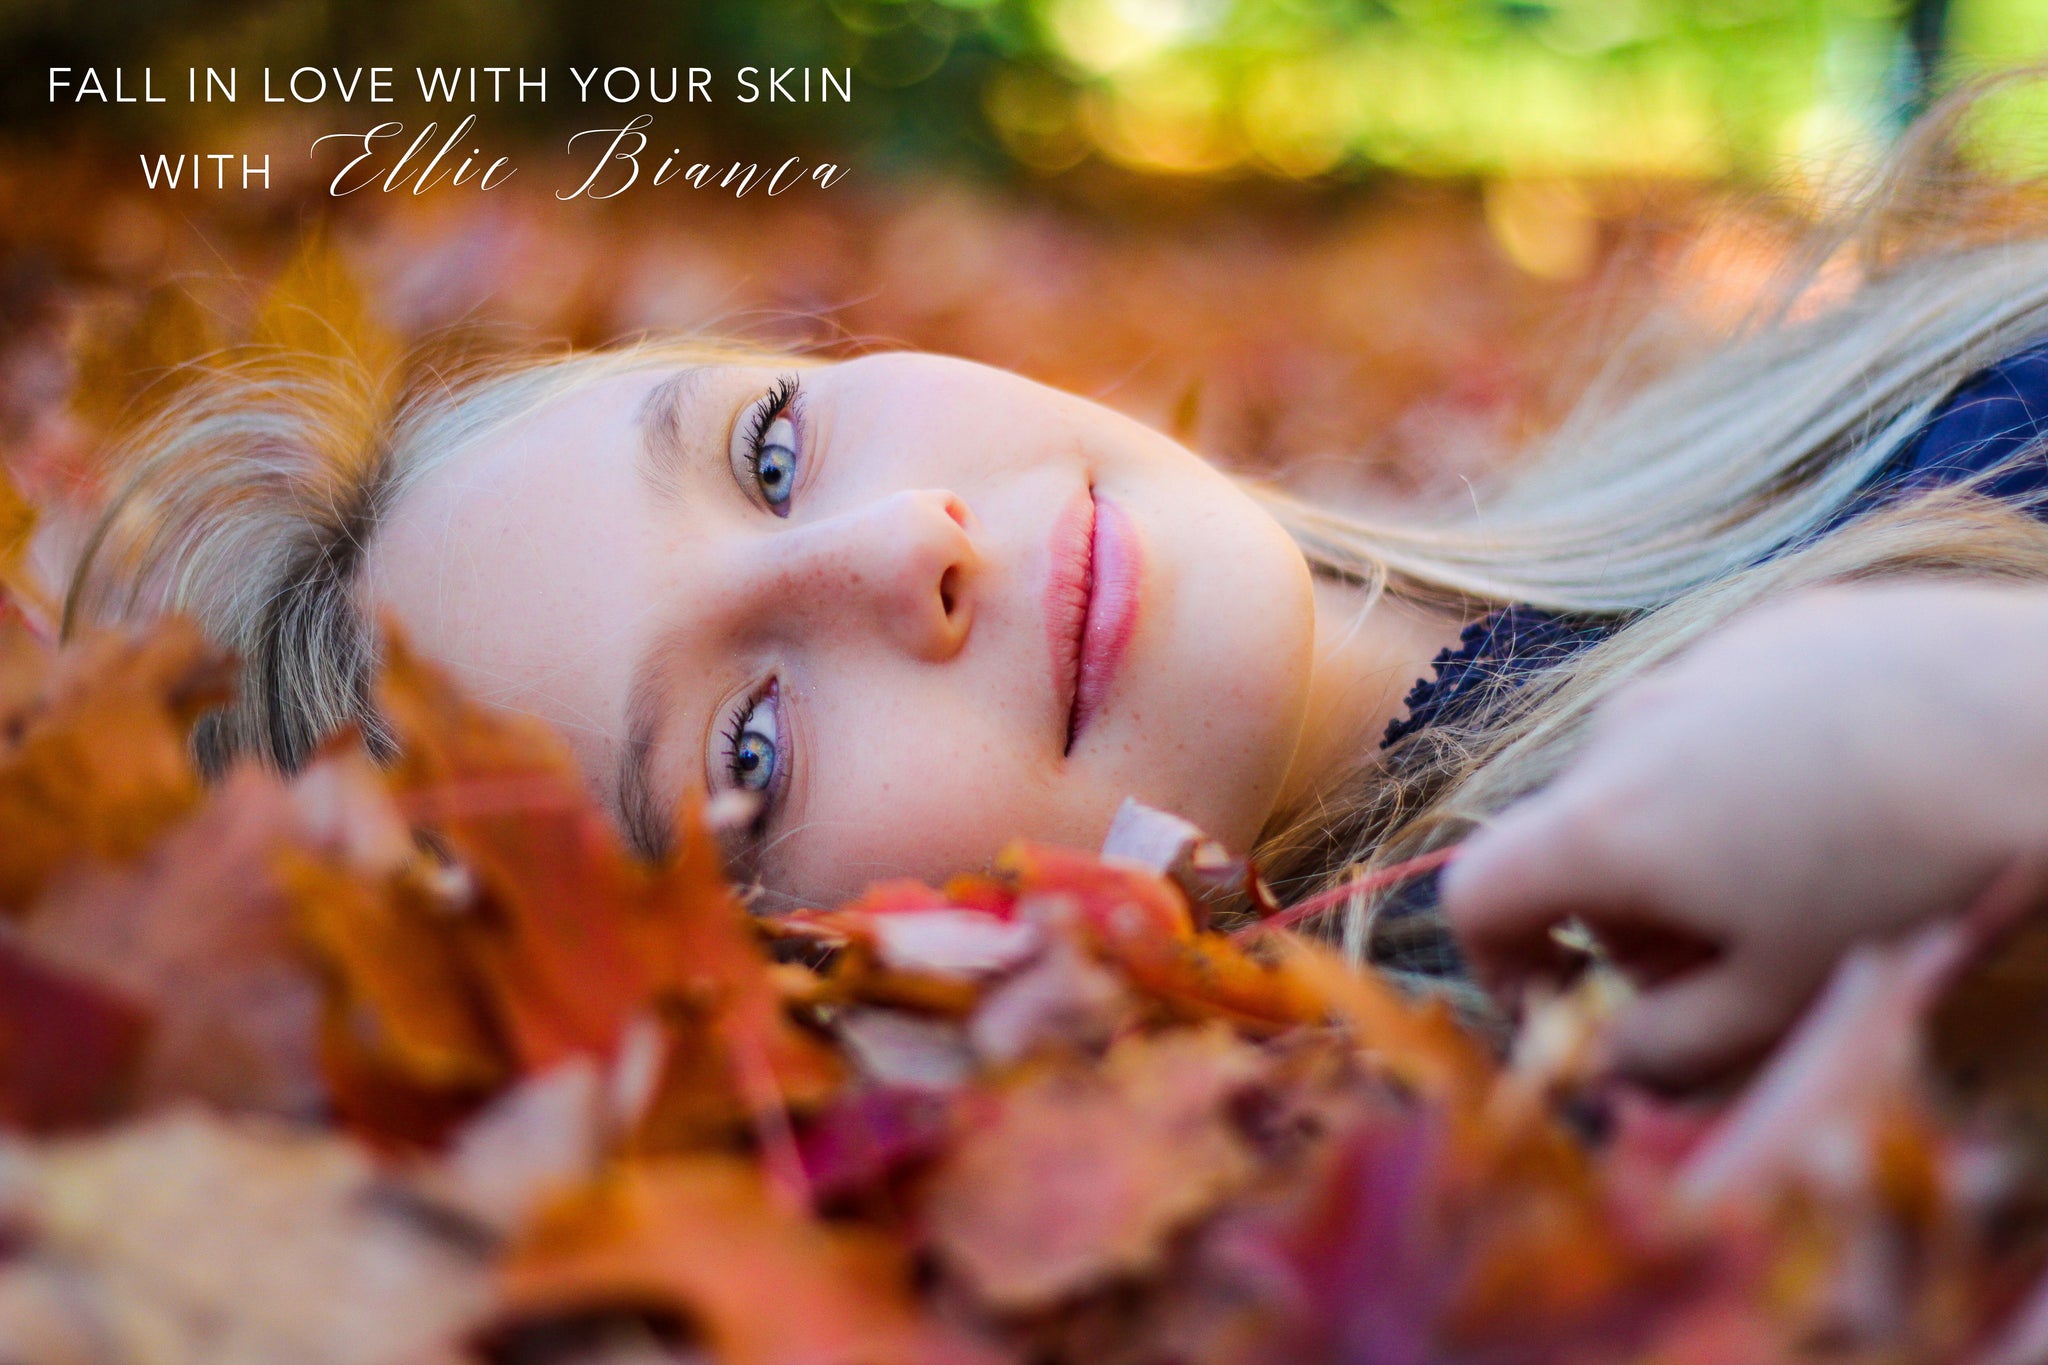 5 Useful Tips to Own your Fall Skincare Routine